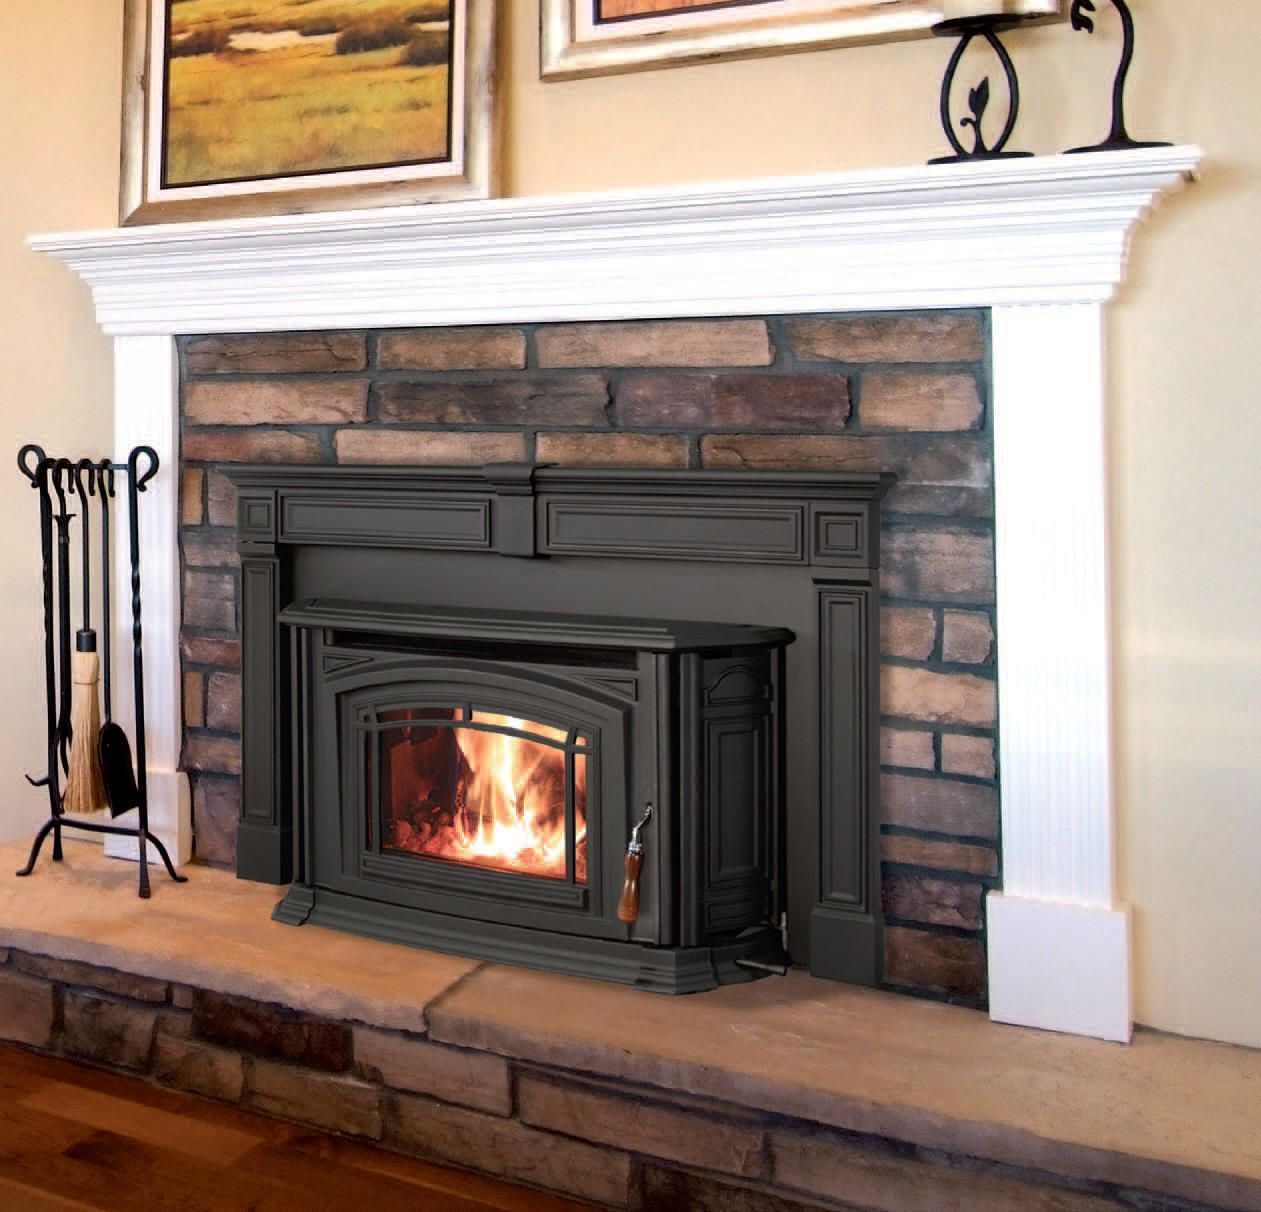 Wood Stove In Fireplace Vs Insert Fresh I Like This Pellet Stove with A Mantel